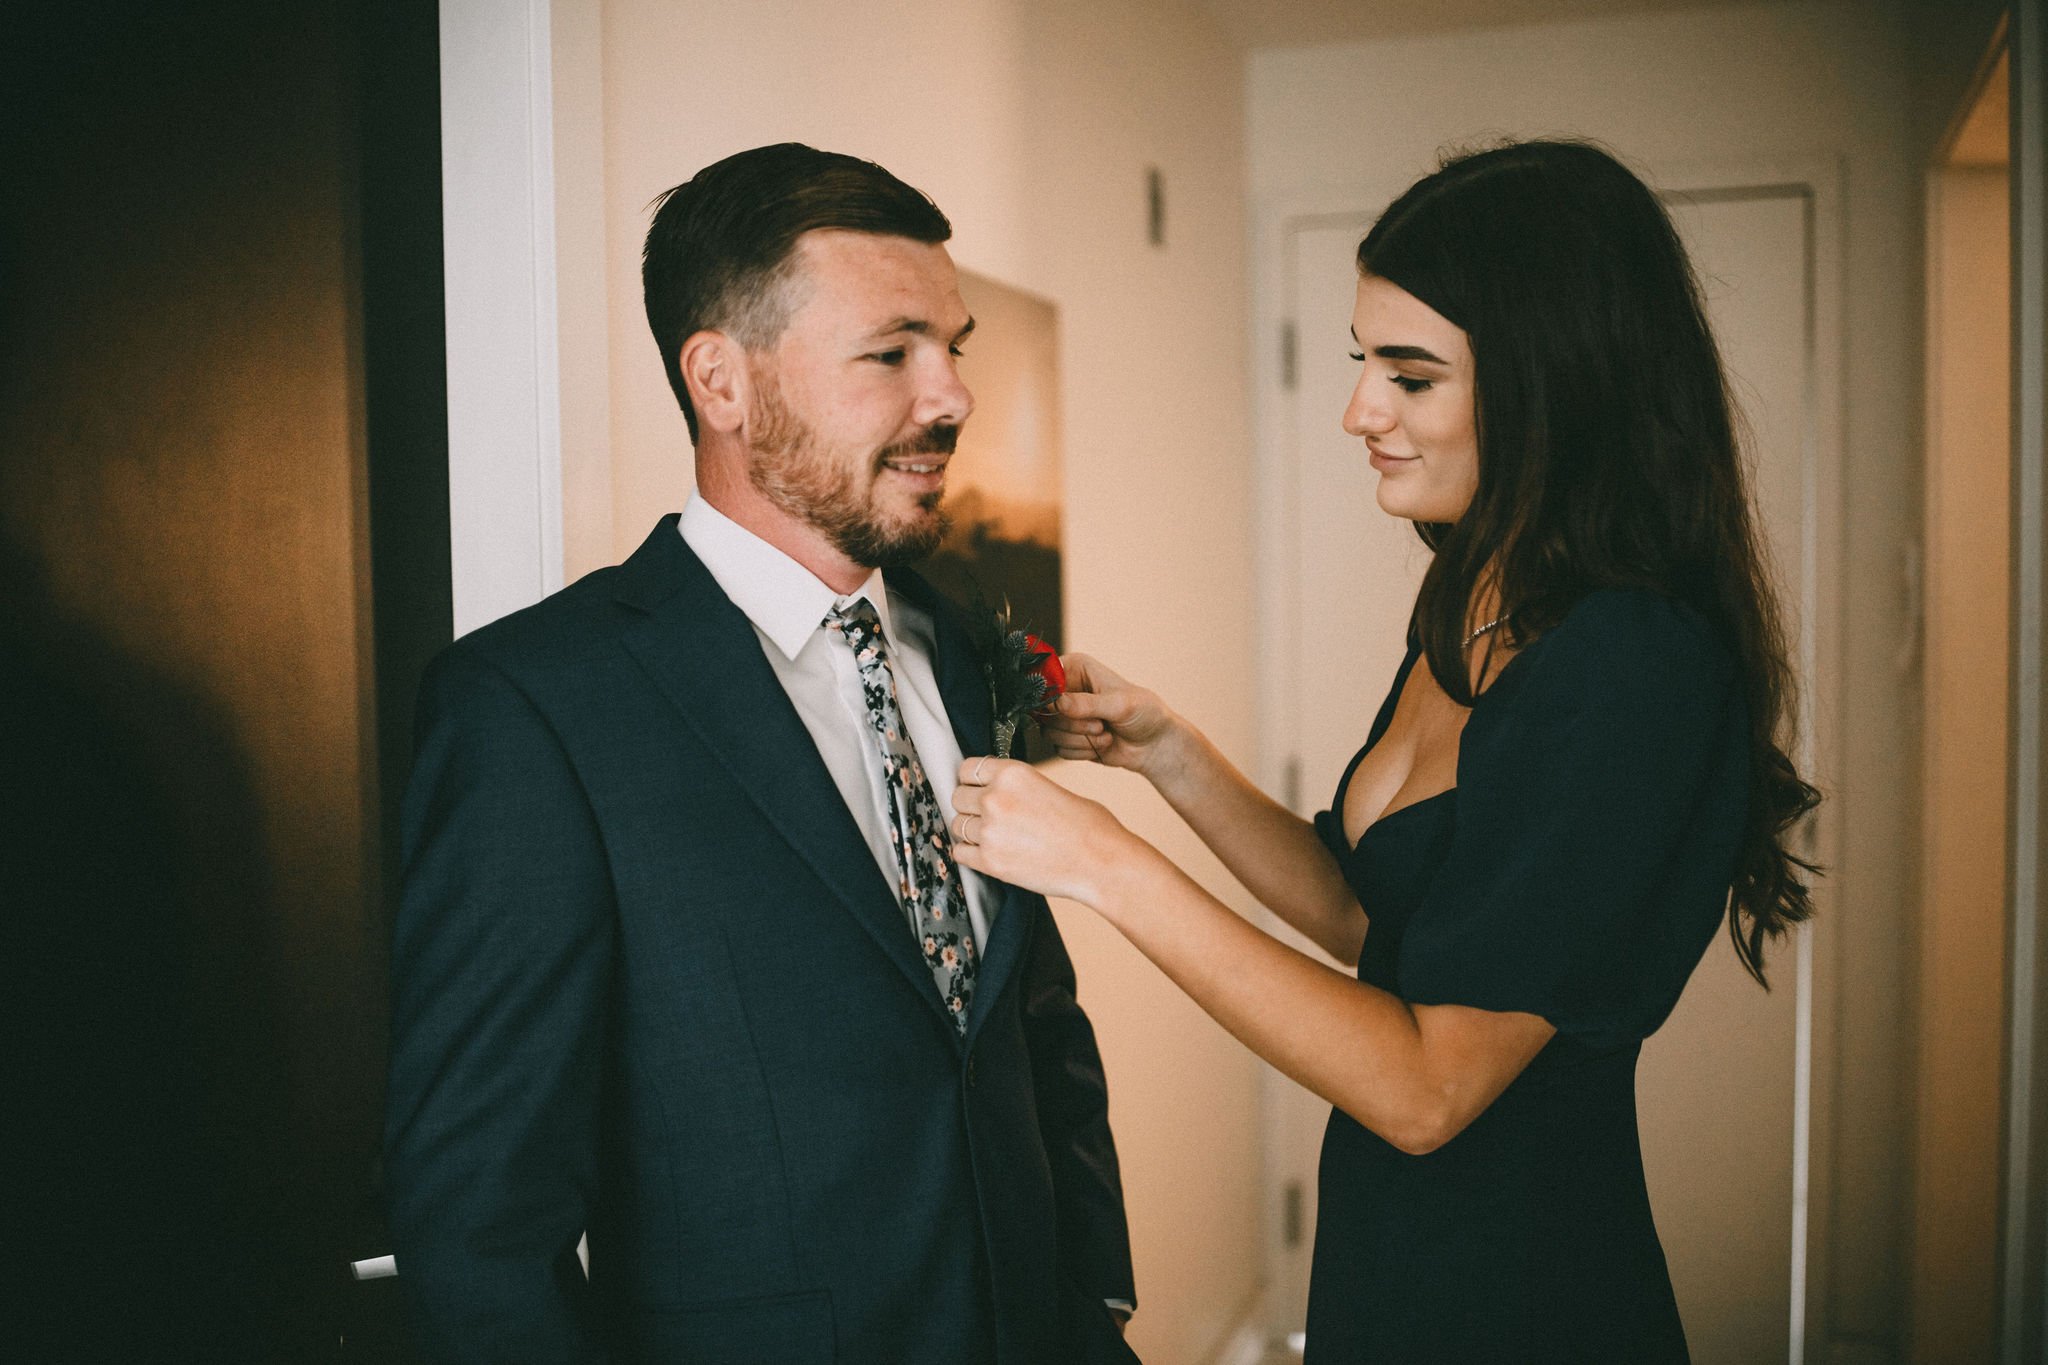 VANCOUVER ELOPEMENT PACKAGES